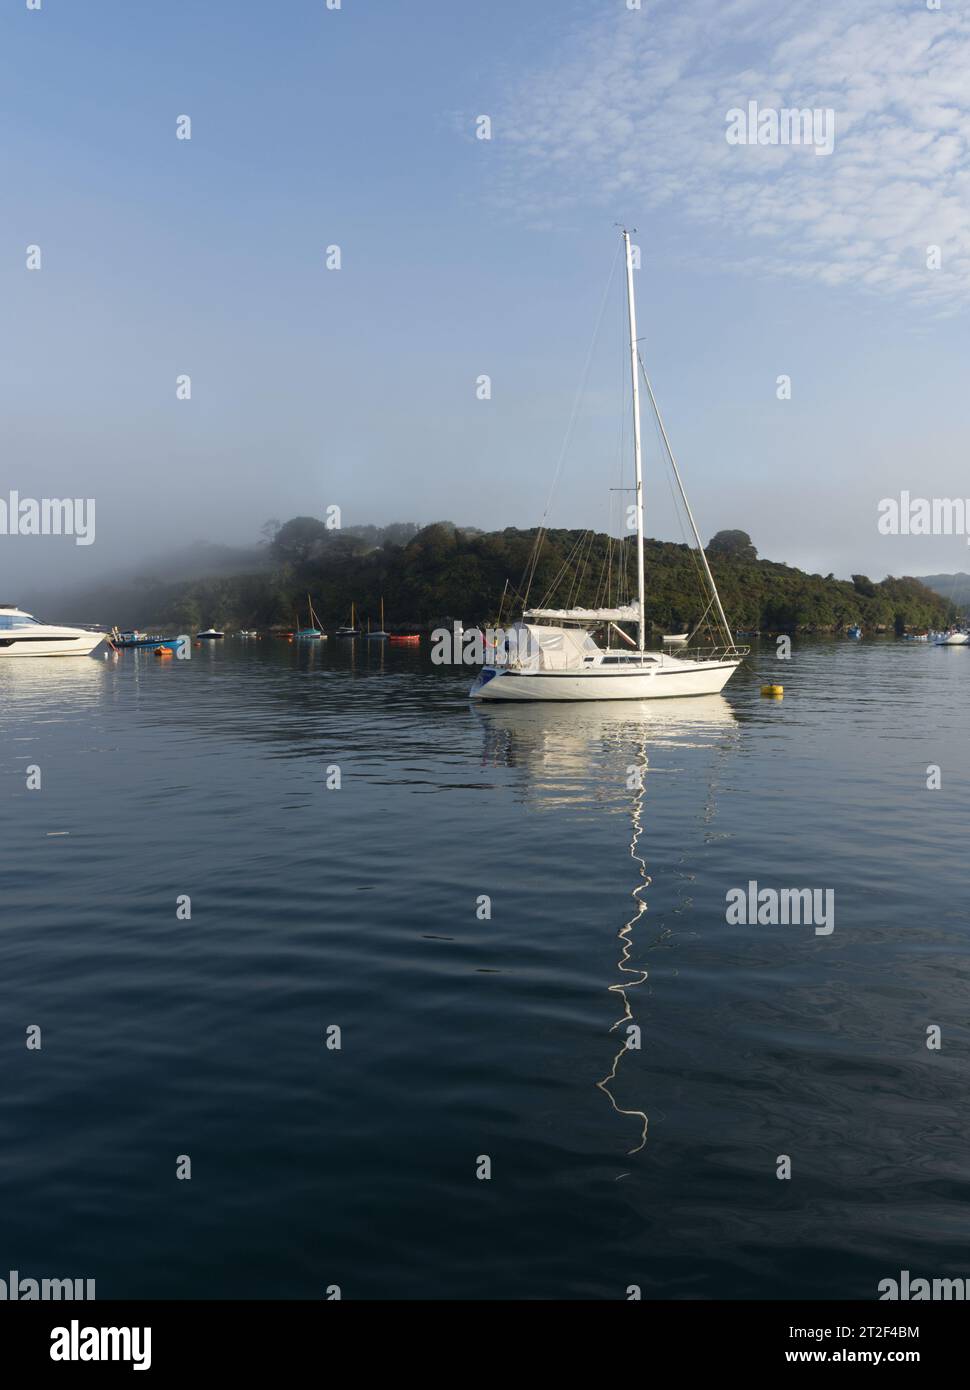 Yachts and reflections on a calm foggy morning in Salcombe Harbour Stock Photo